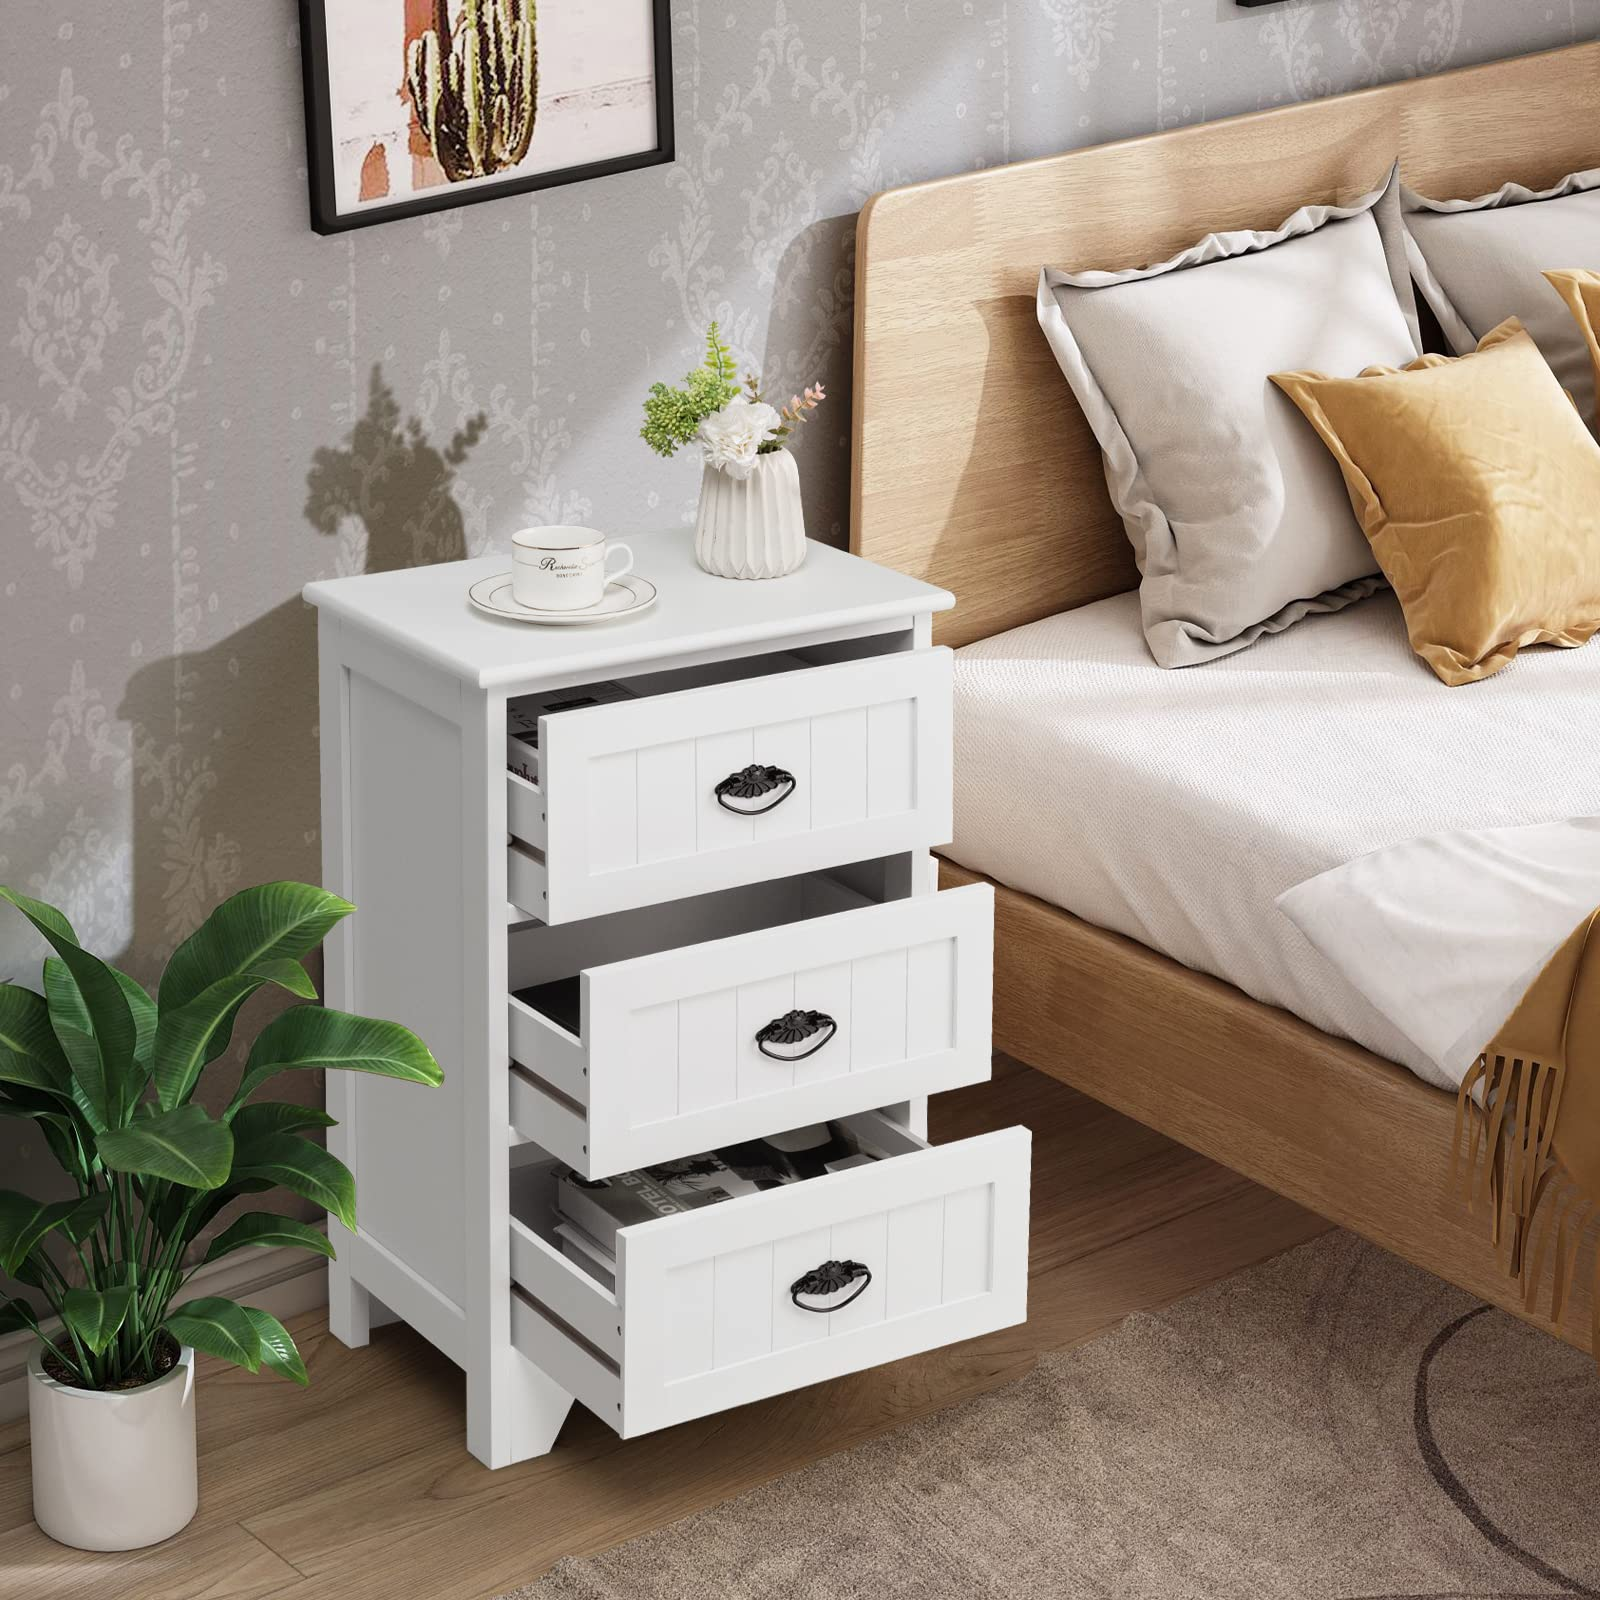 Giantex Nightstand with 3 Drawers, Bedside Table